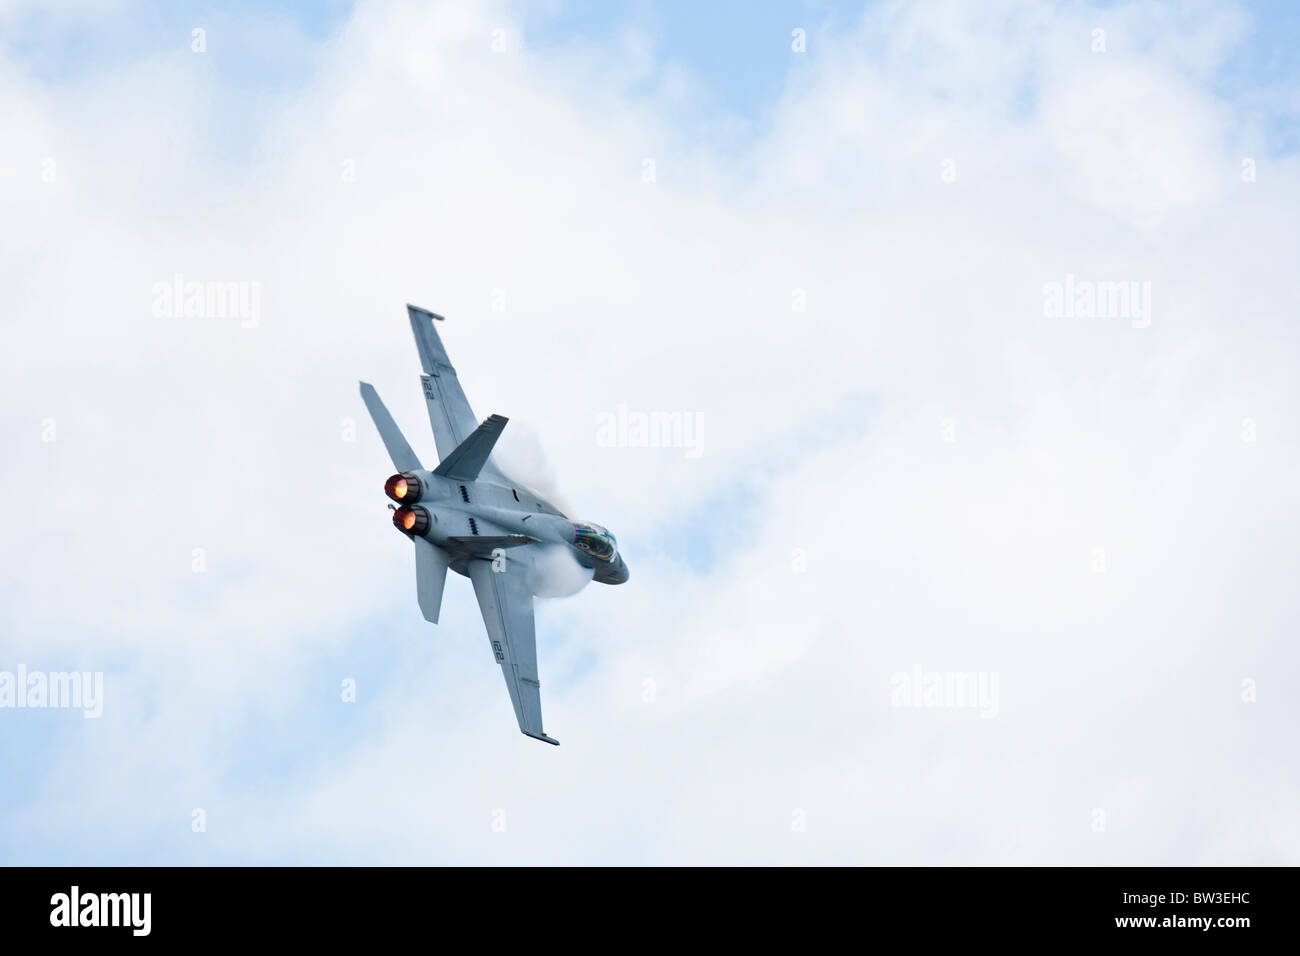 F/A 18 Super Hornet Strike Fighter jet performs during air show at NAS Jacksonville, Florida Stock Photo